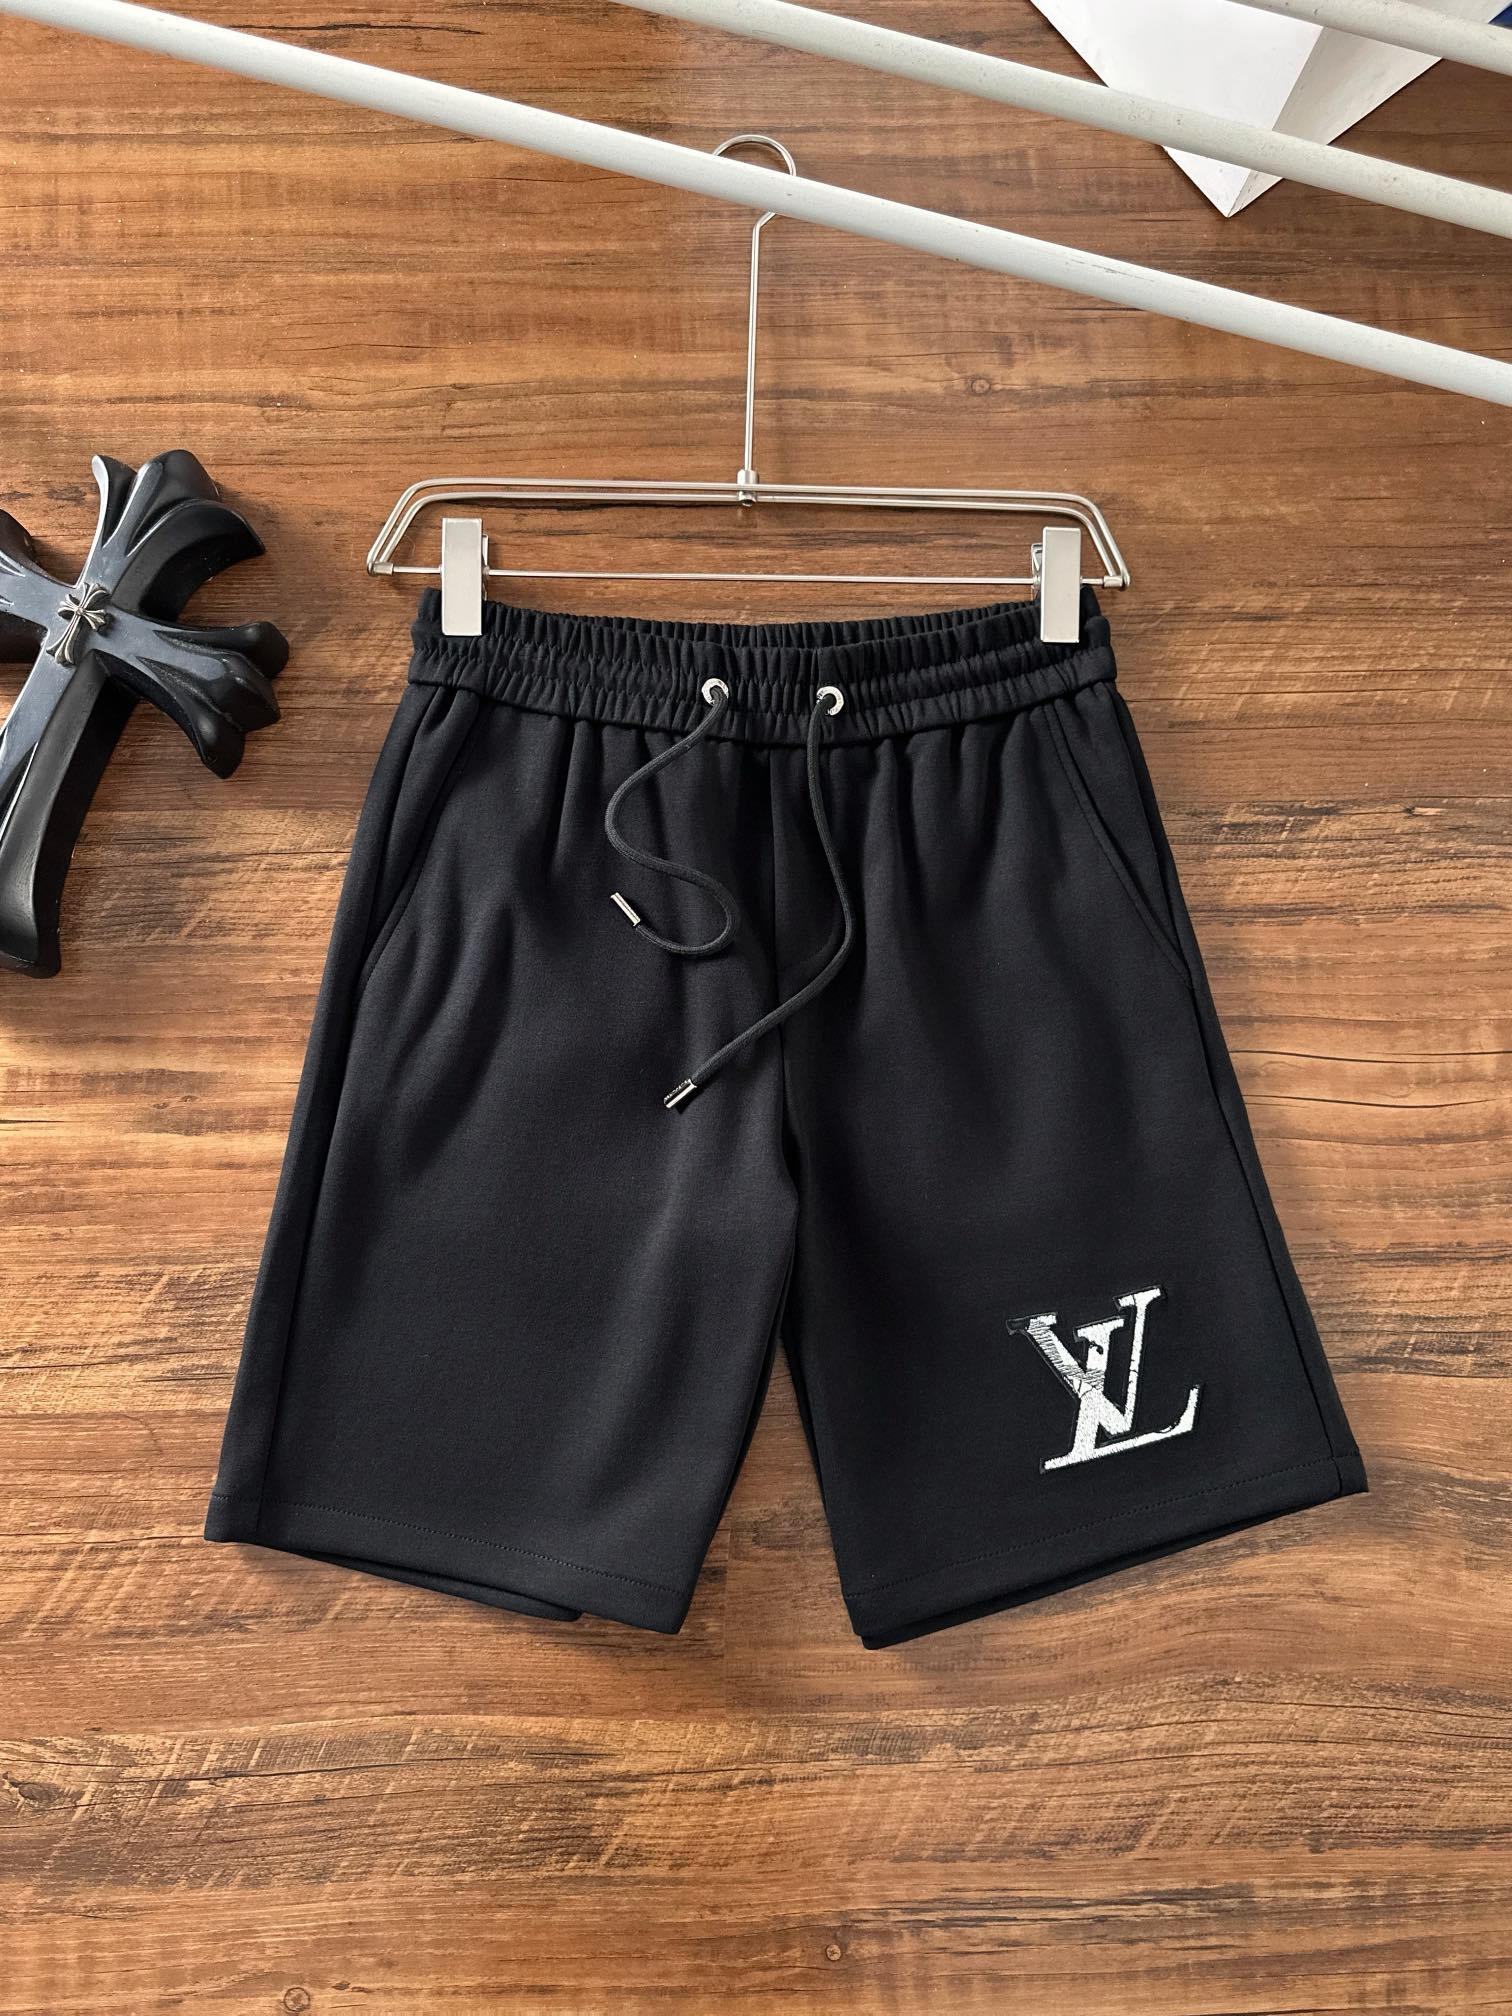 Louis Vuitton Clothing Shorts Cotton Knitted Knitting Spring Collection Fashion Casual